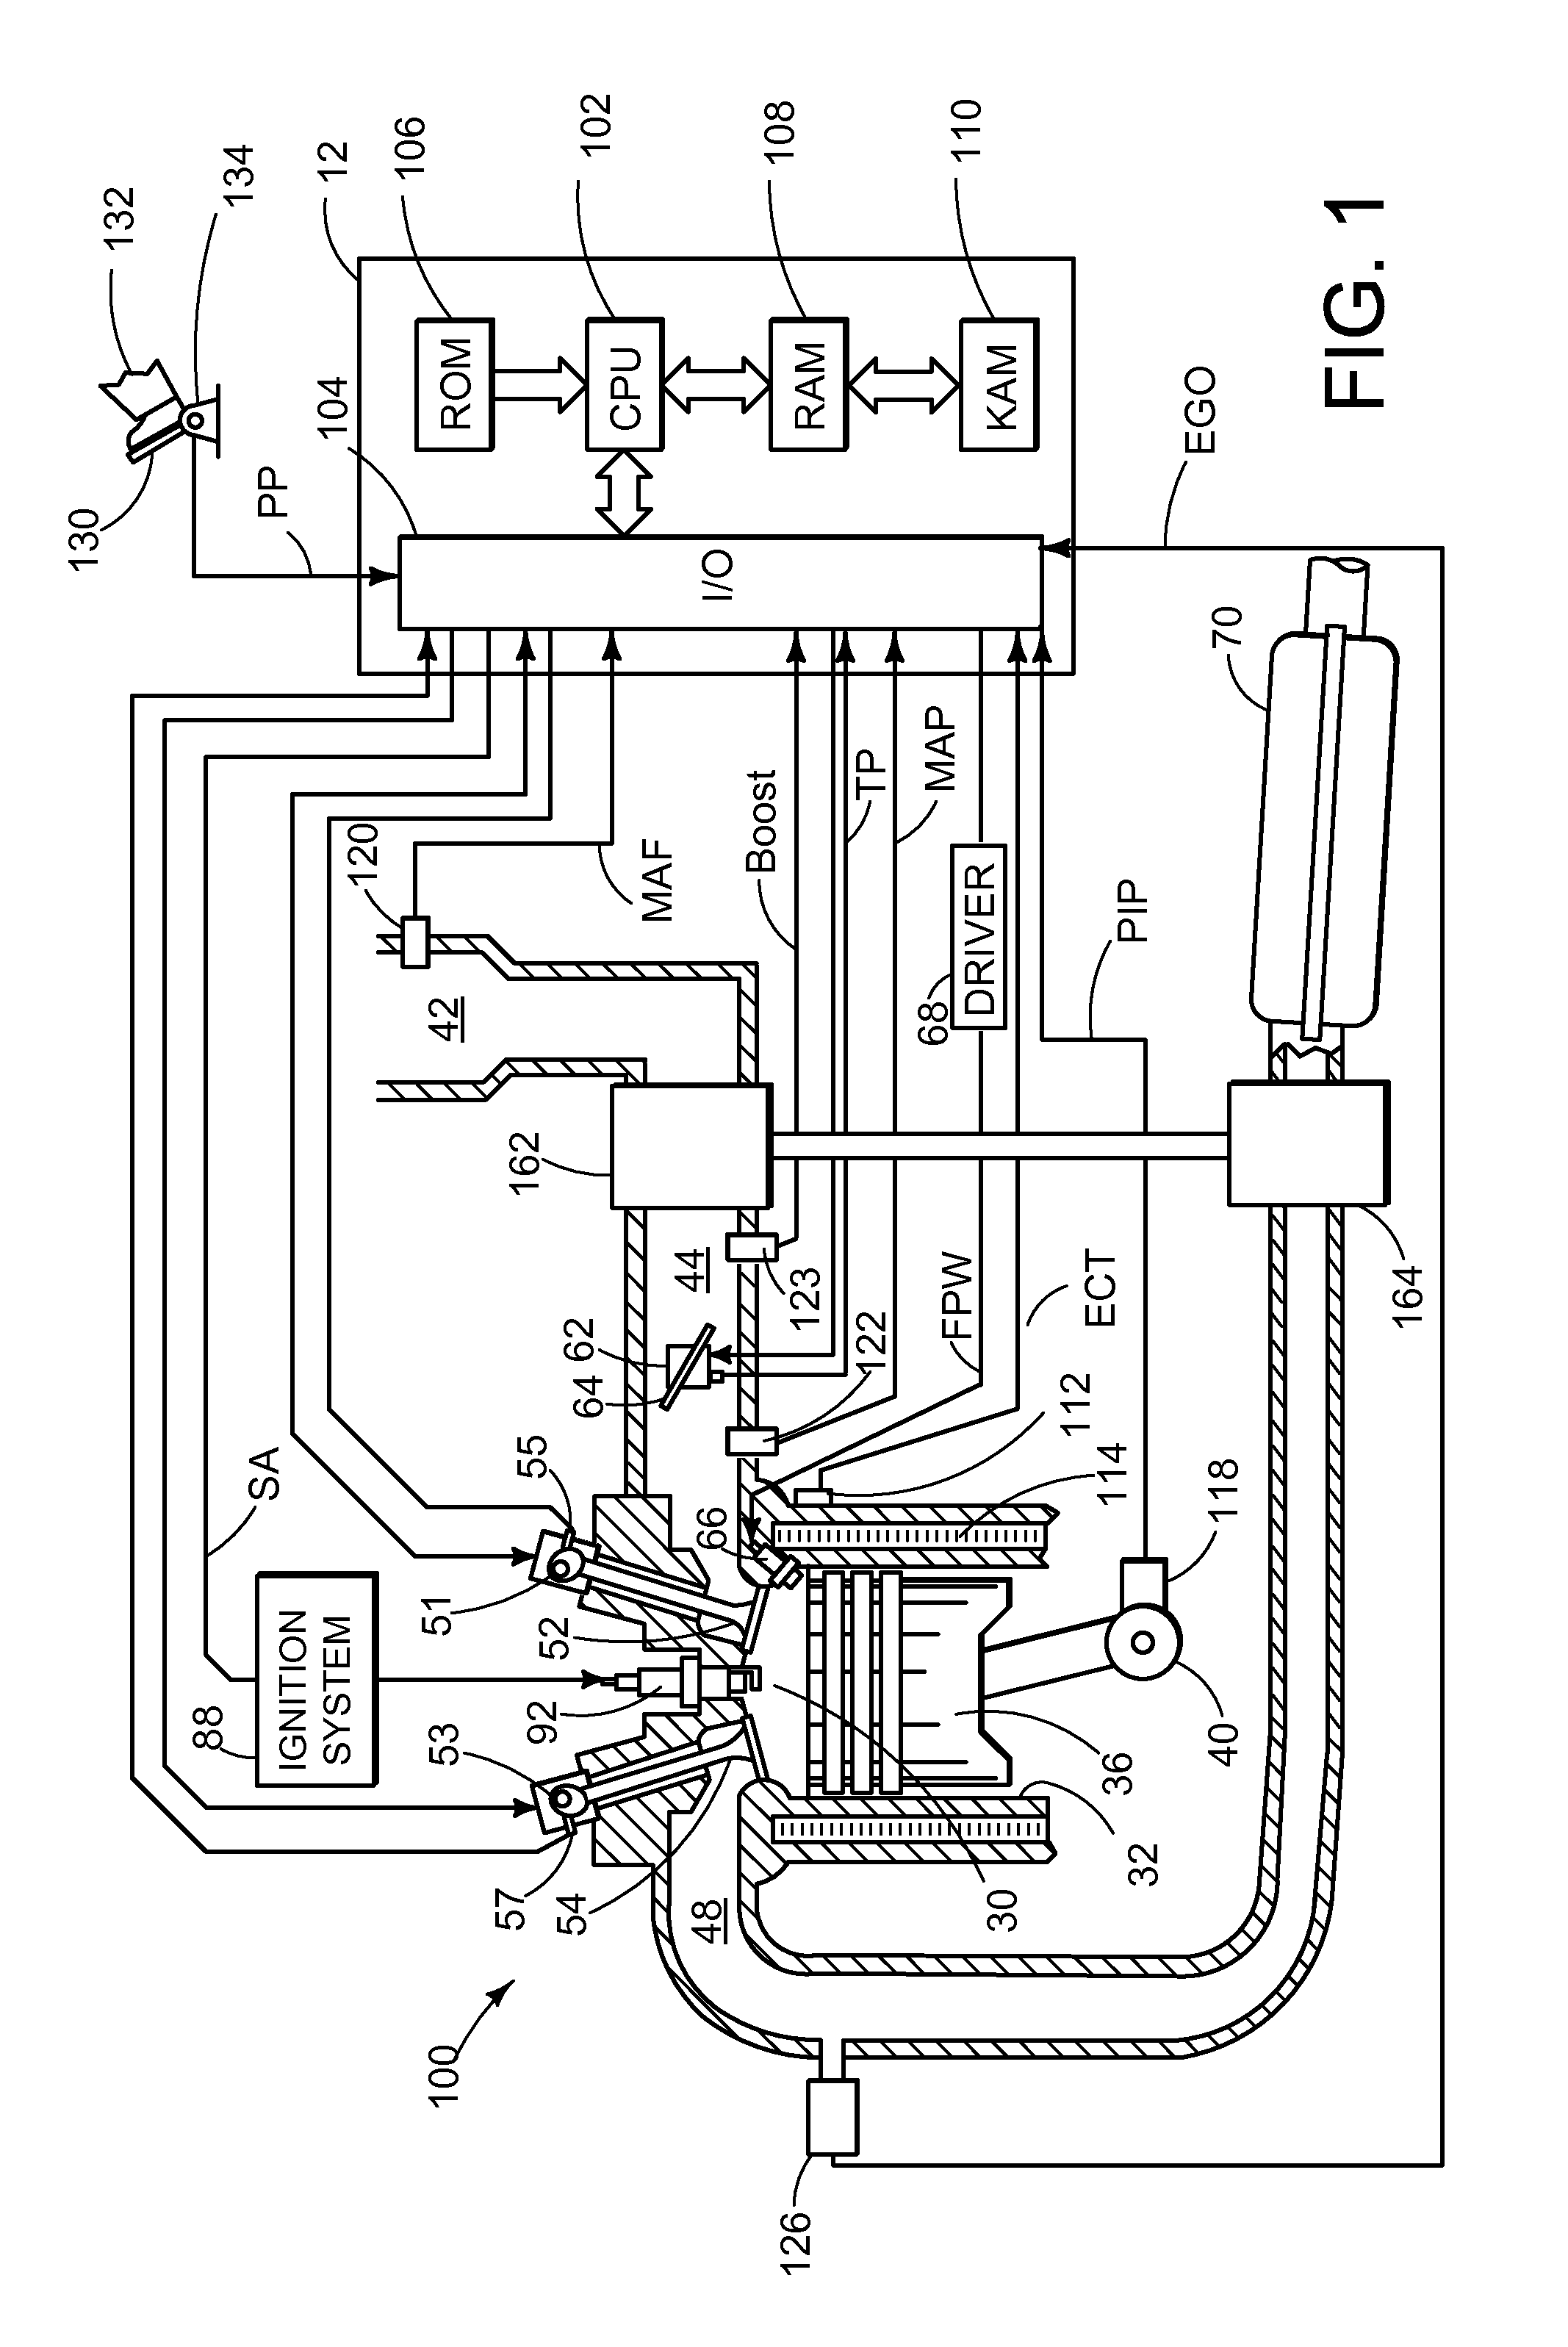 Four-cylinder in-line engine with partial shutdown and method for operating such a four-cylinder in-line engine